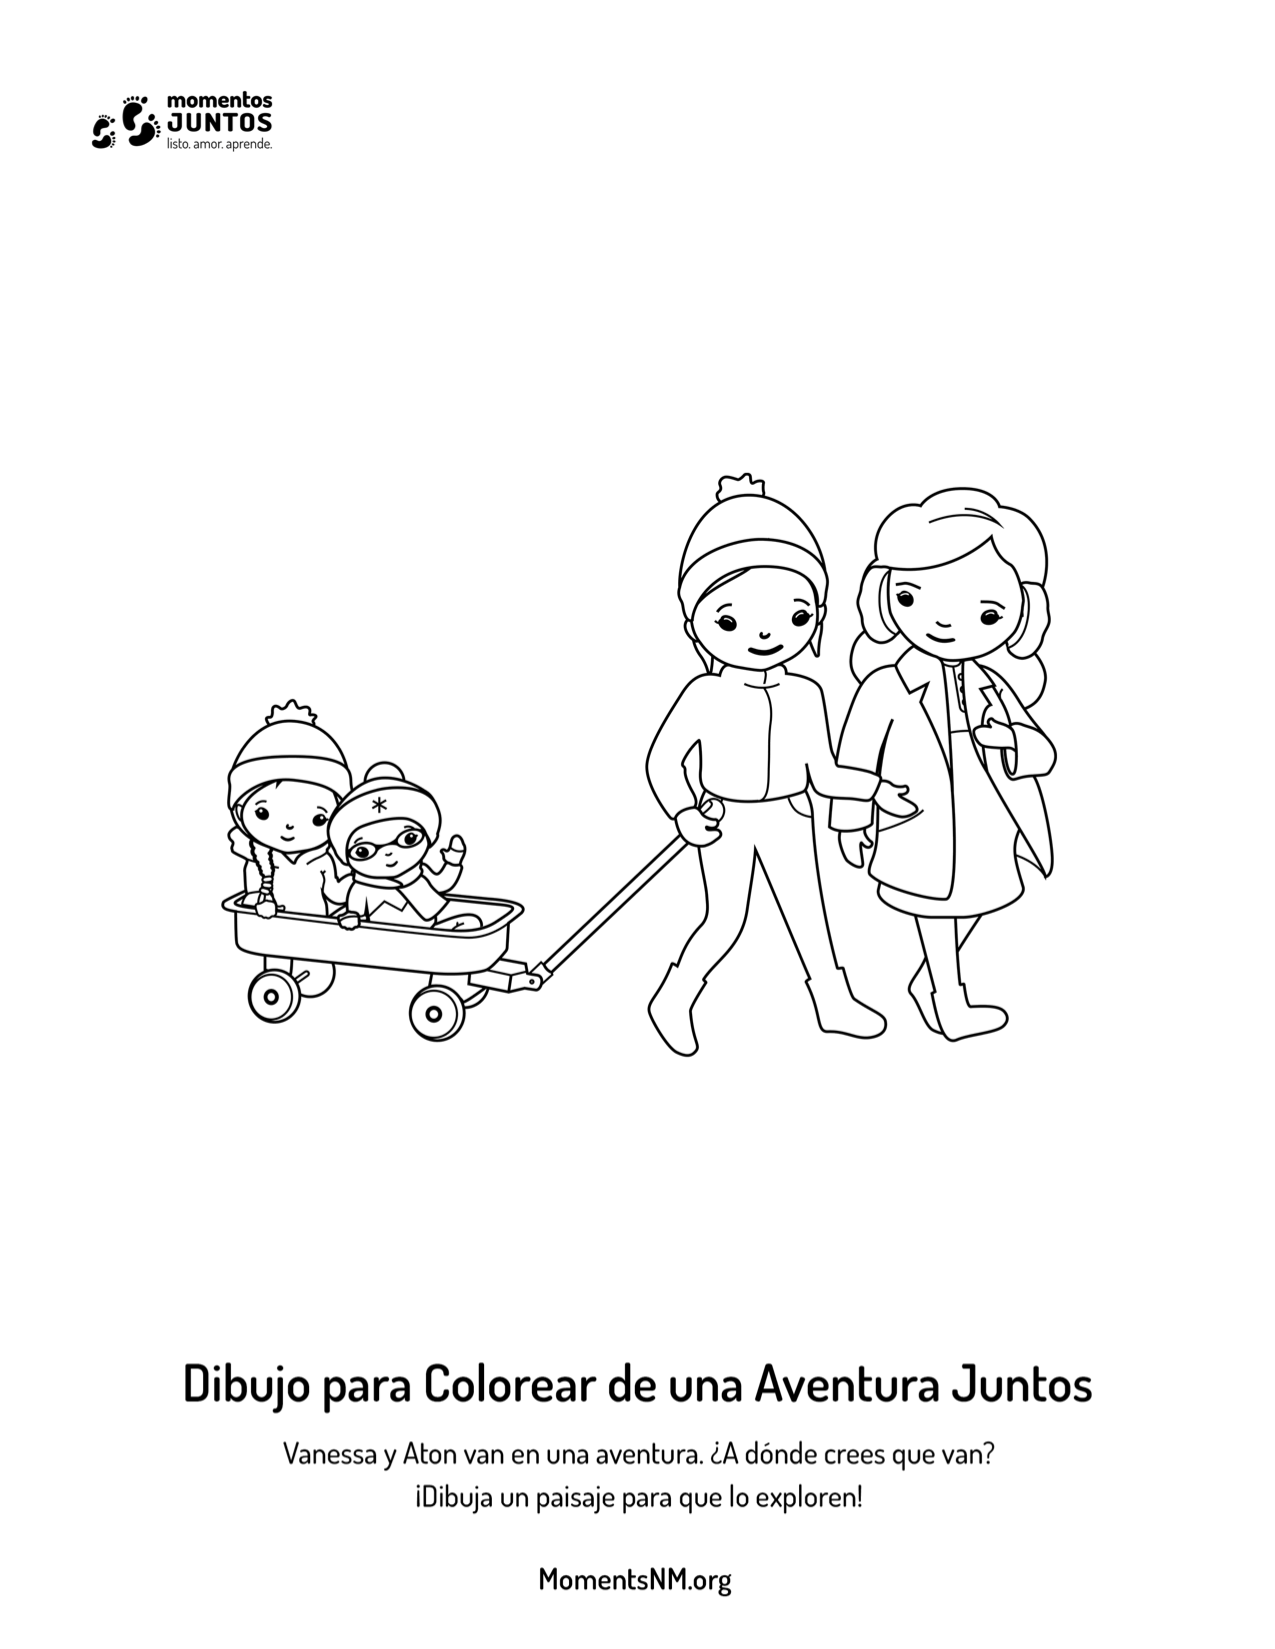 Two parents walking with children in wagon coloring sheet